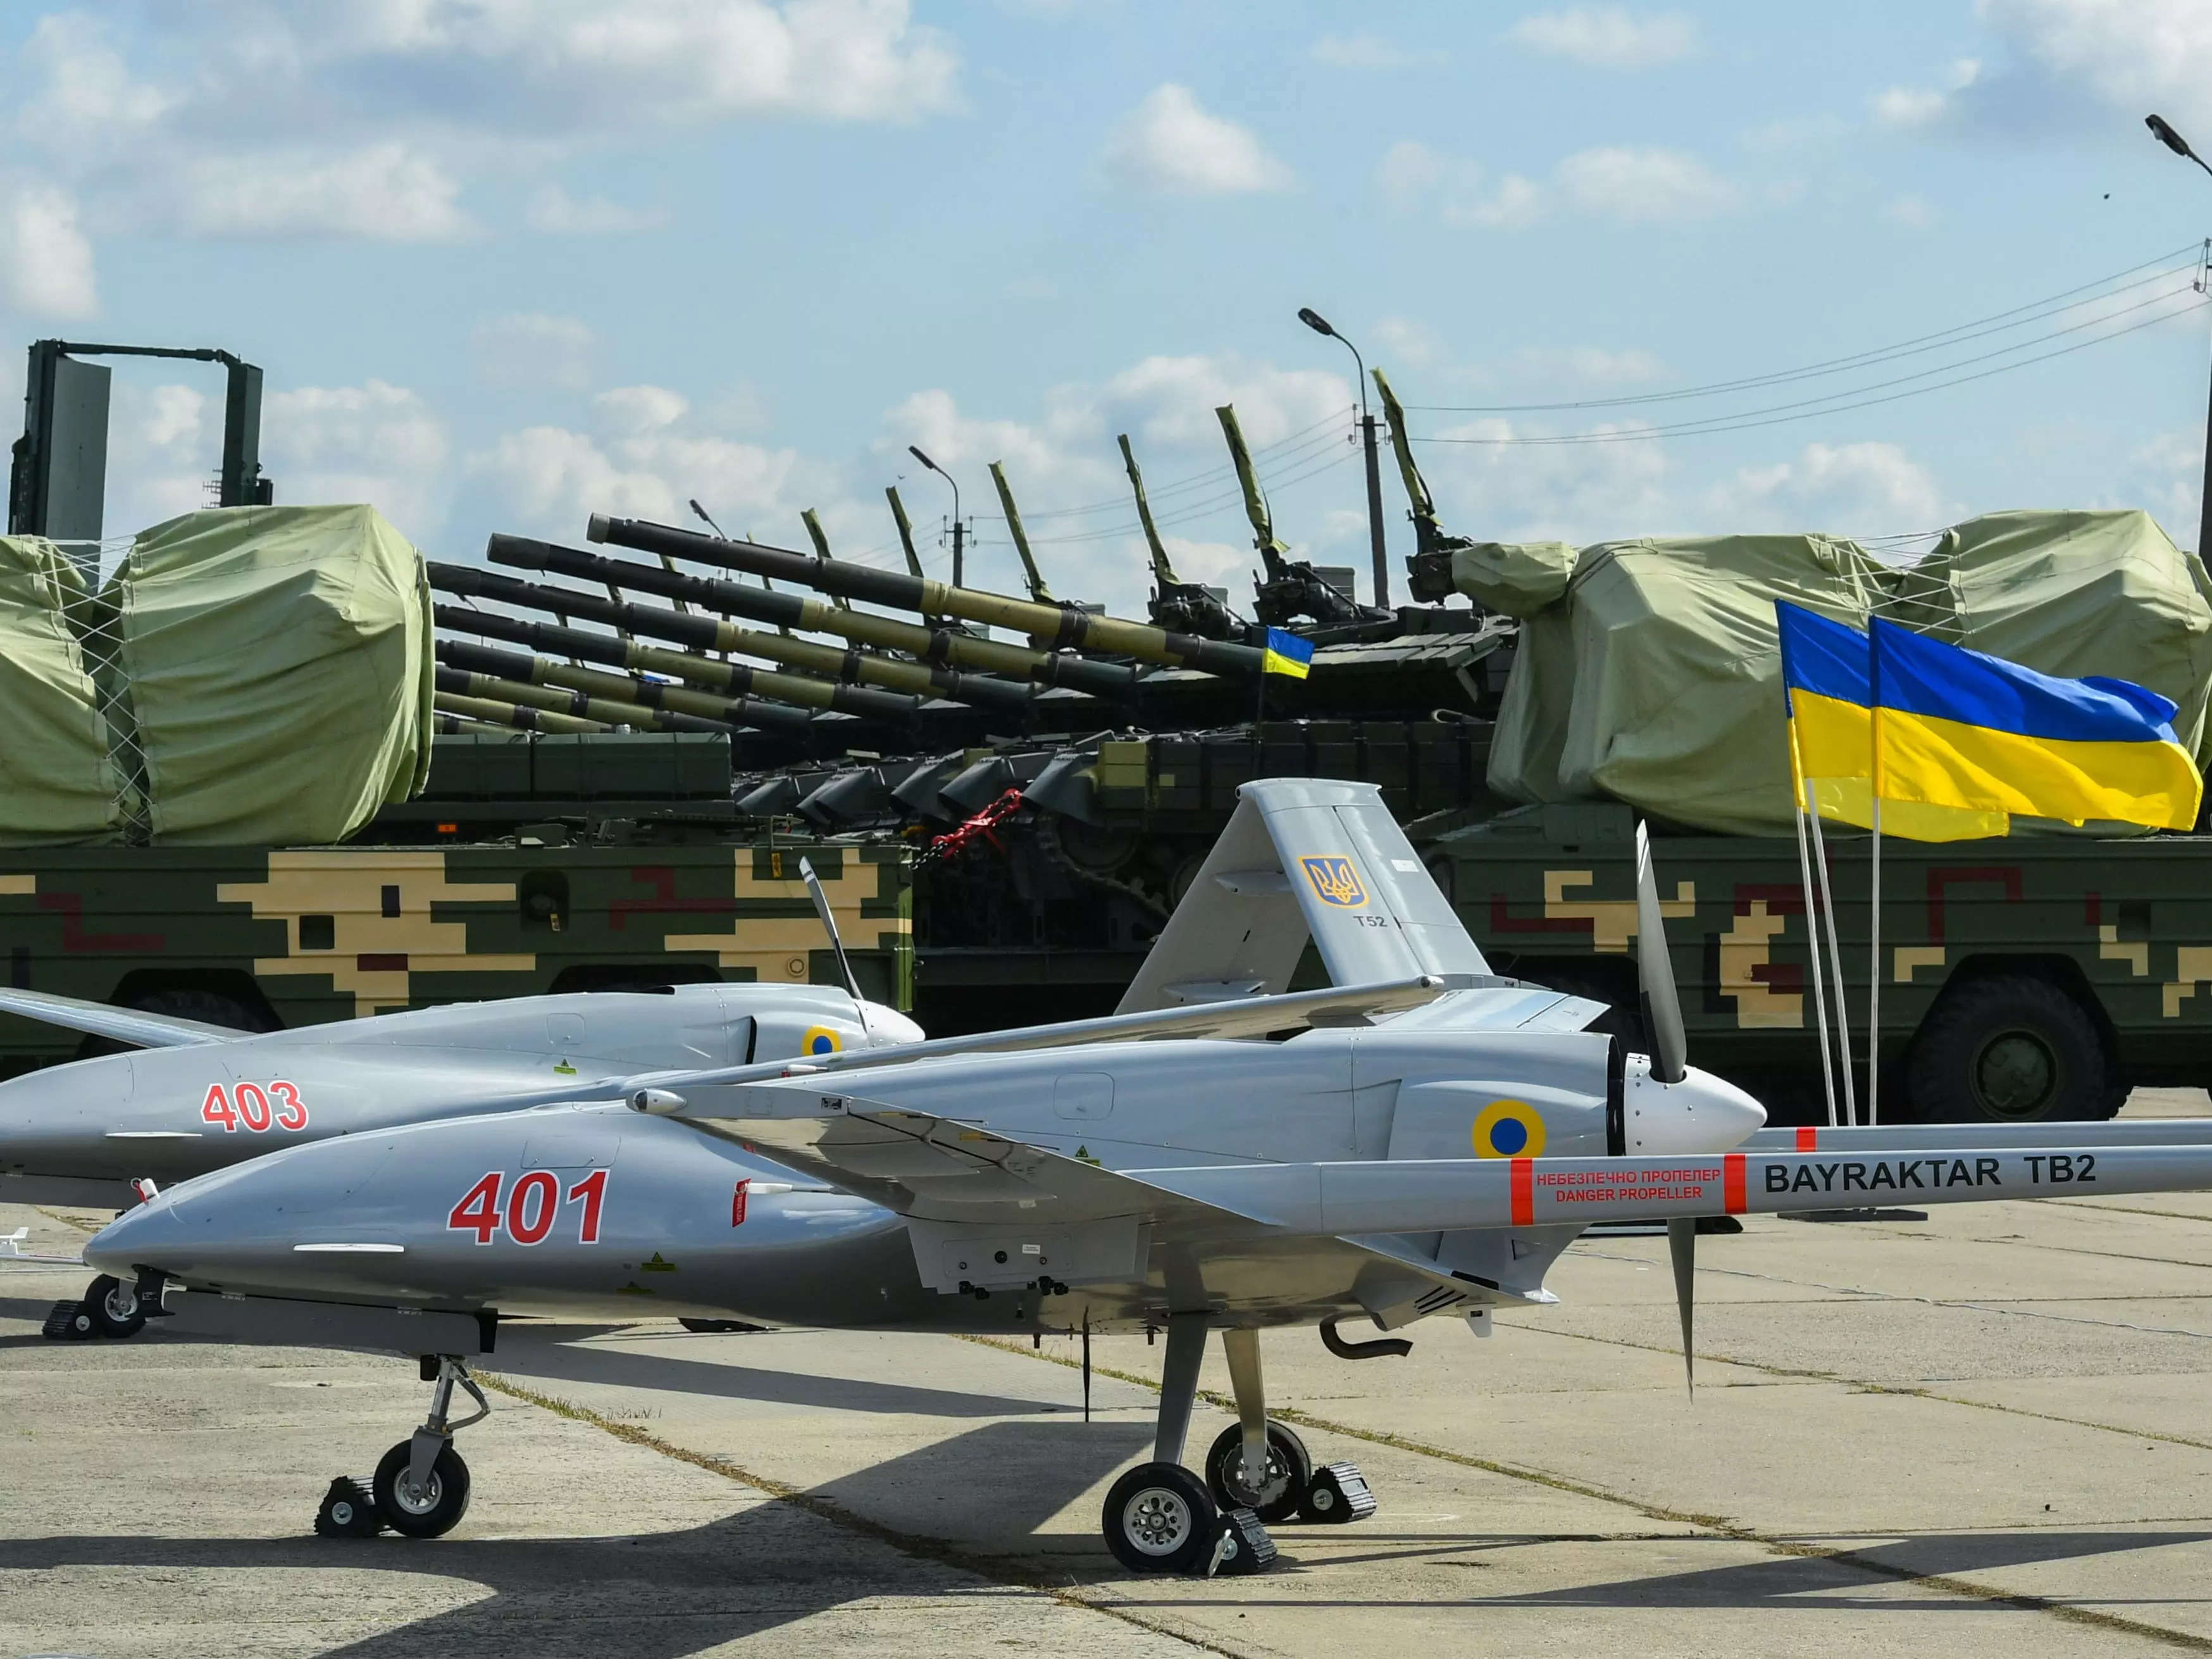 Bayraktar TB2 UAVs is seen during the test flight at the military base located in Hmelnitski, Ukraine on March 20, 2019.